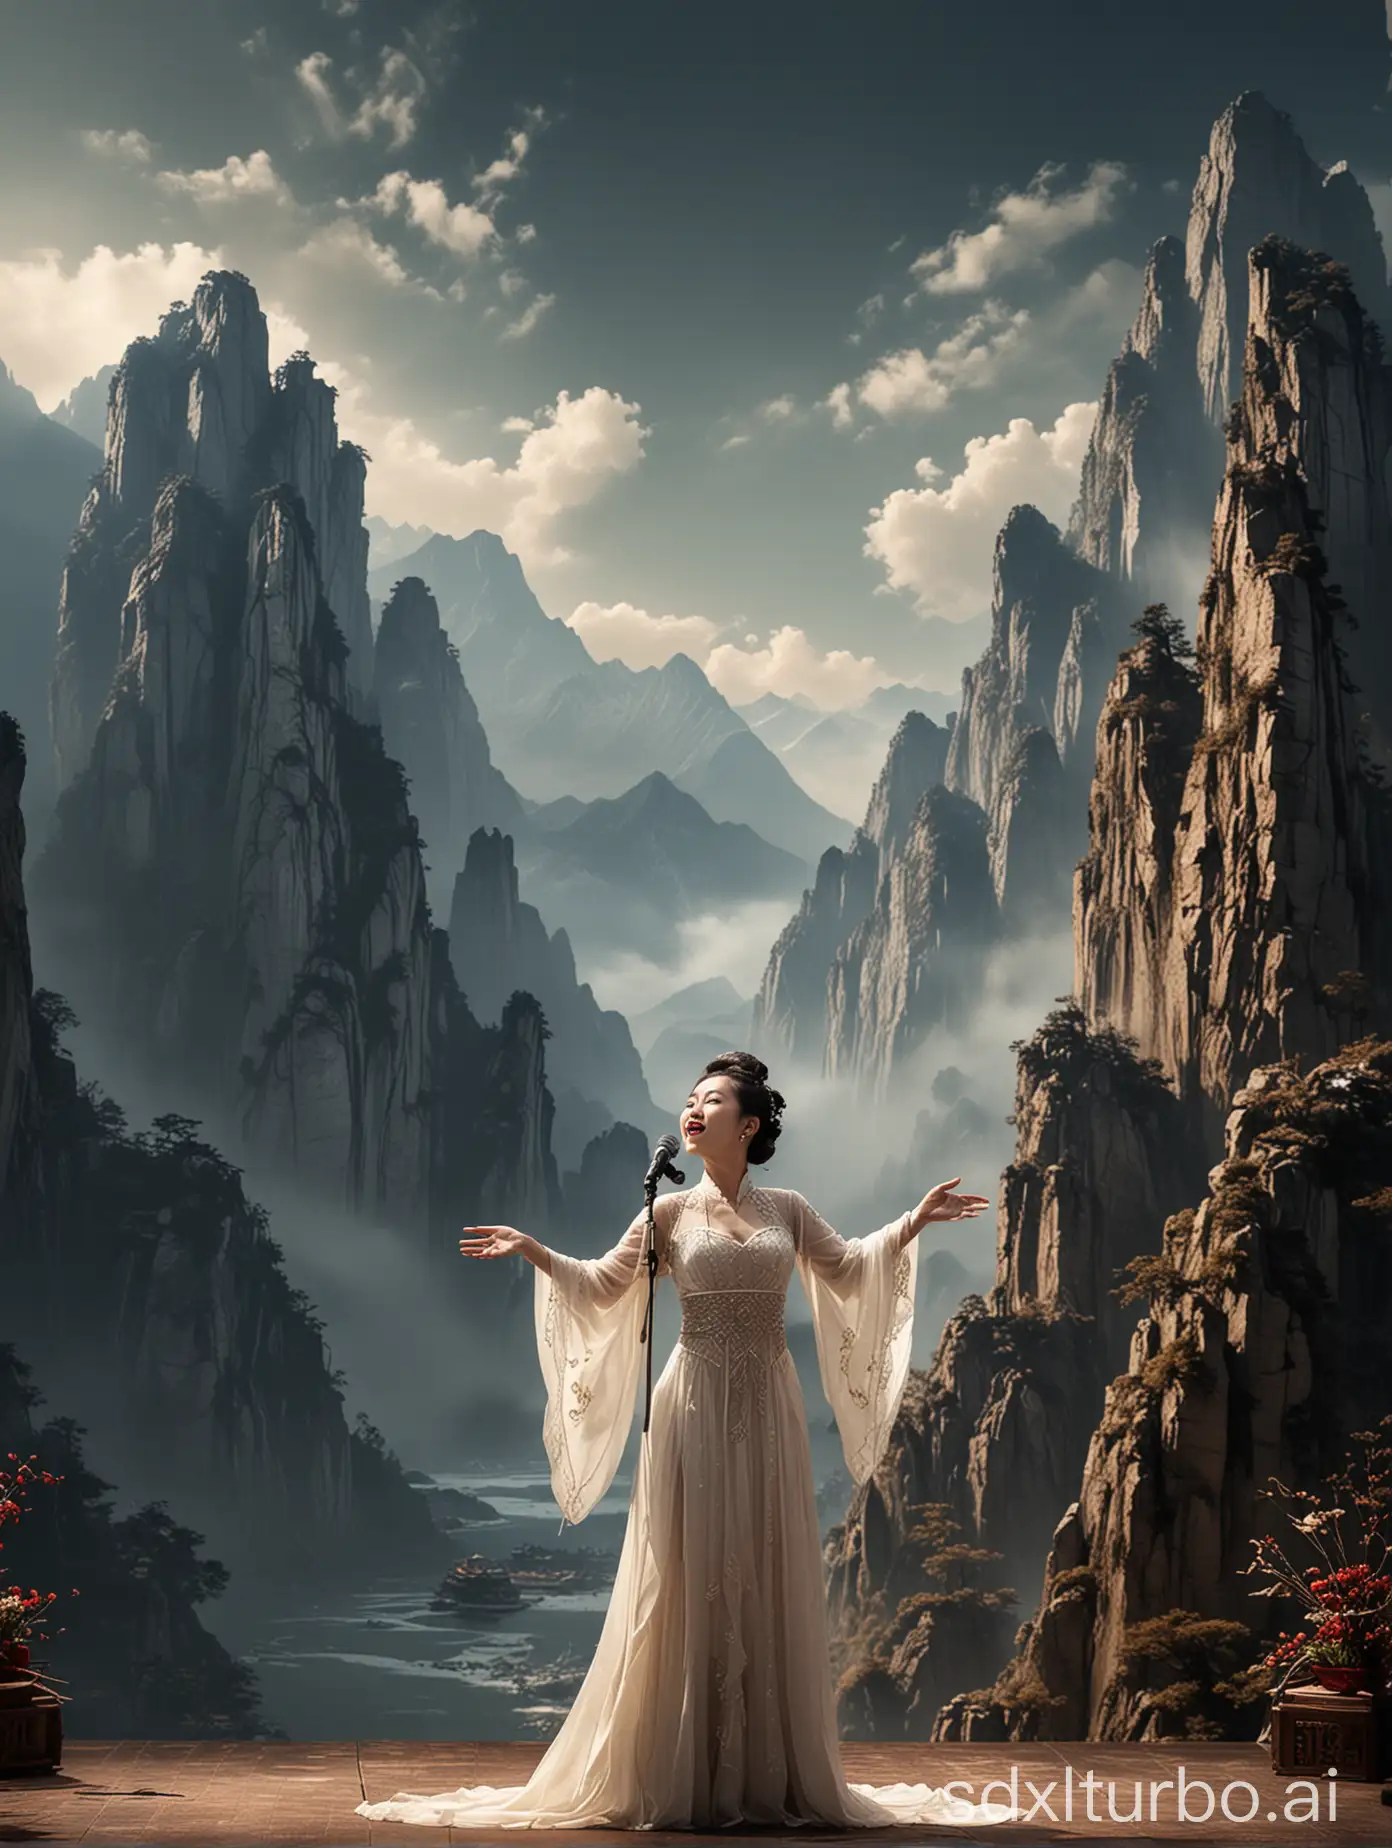 Leoarmo, a refined Chinese woman, sings her heart out on stage, with two towering mountains in the background, creating a stark contrast and giving the impression of bearing a great burden!